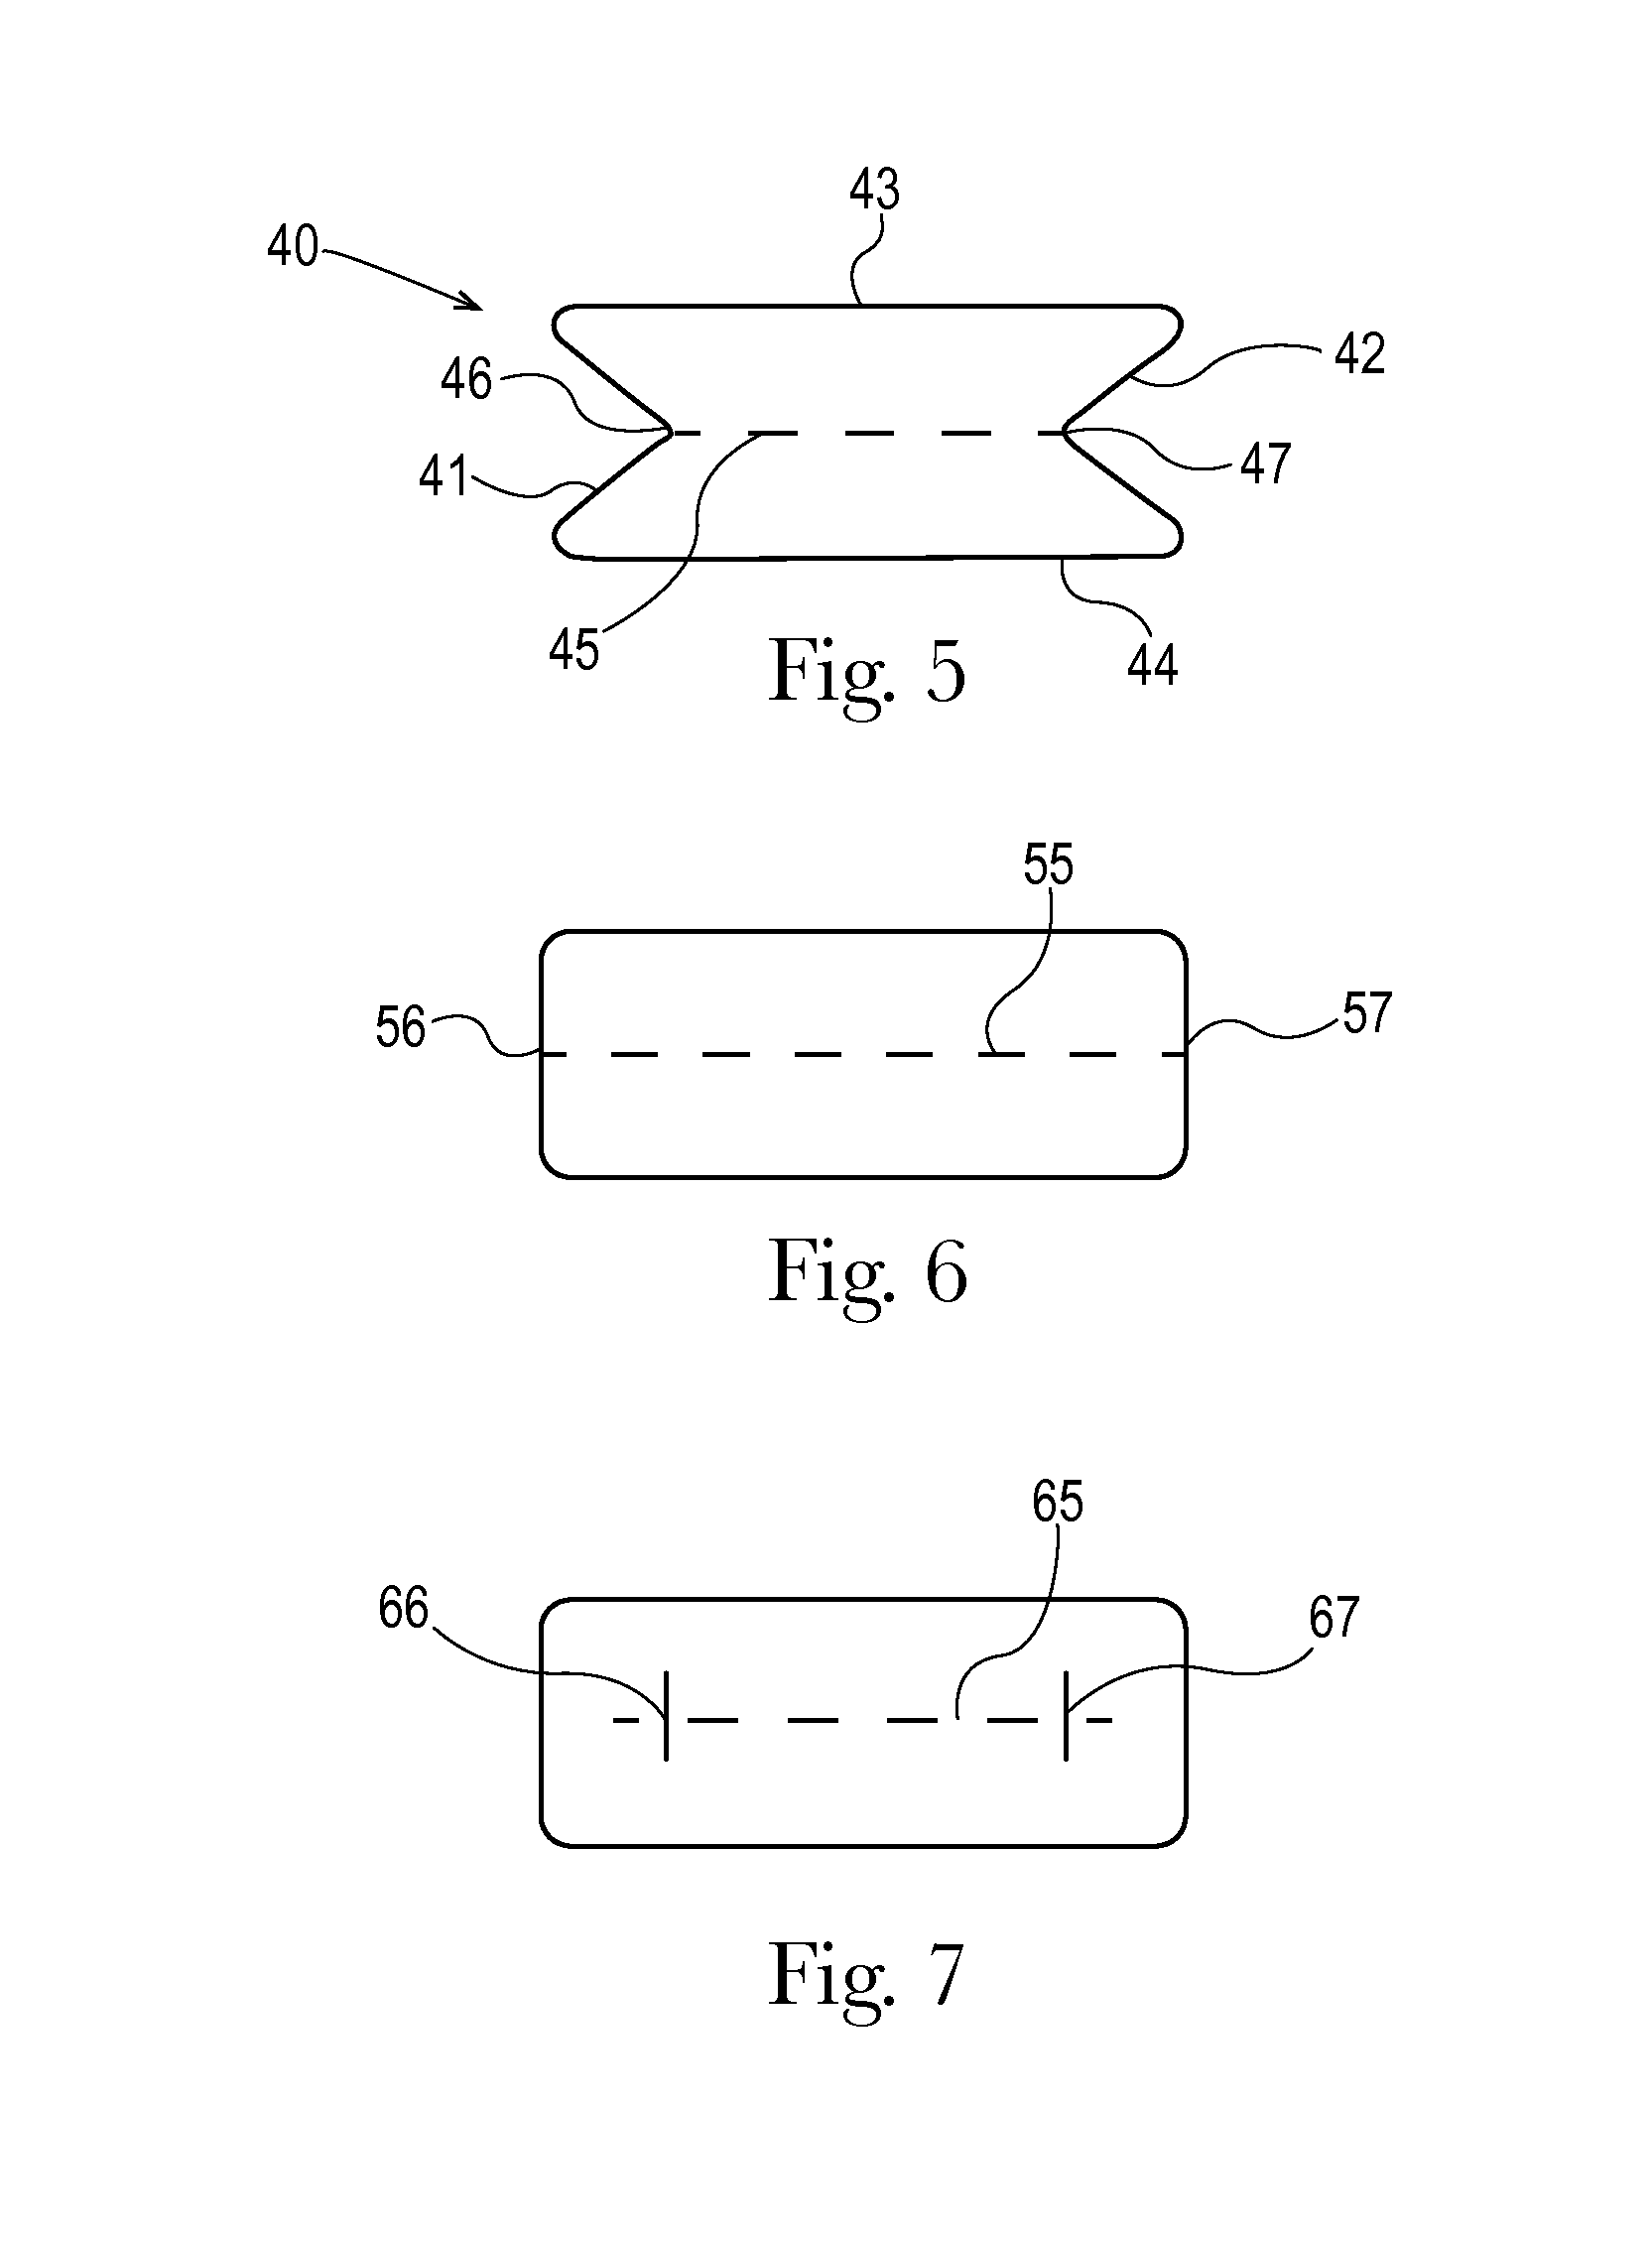 Strip For The Delivery Of An Oral Care Active And Methods For Applying Oral Care Actives